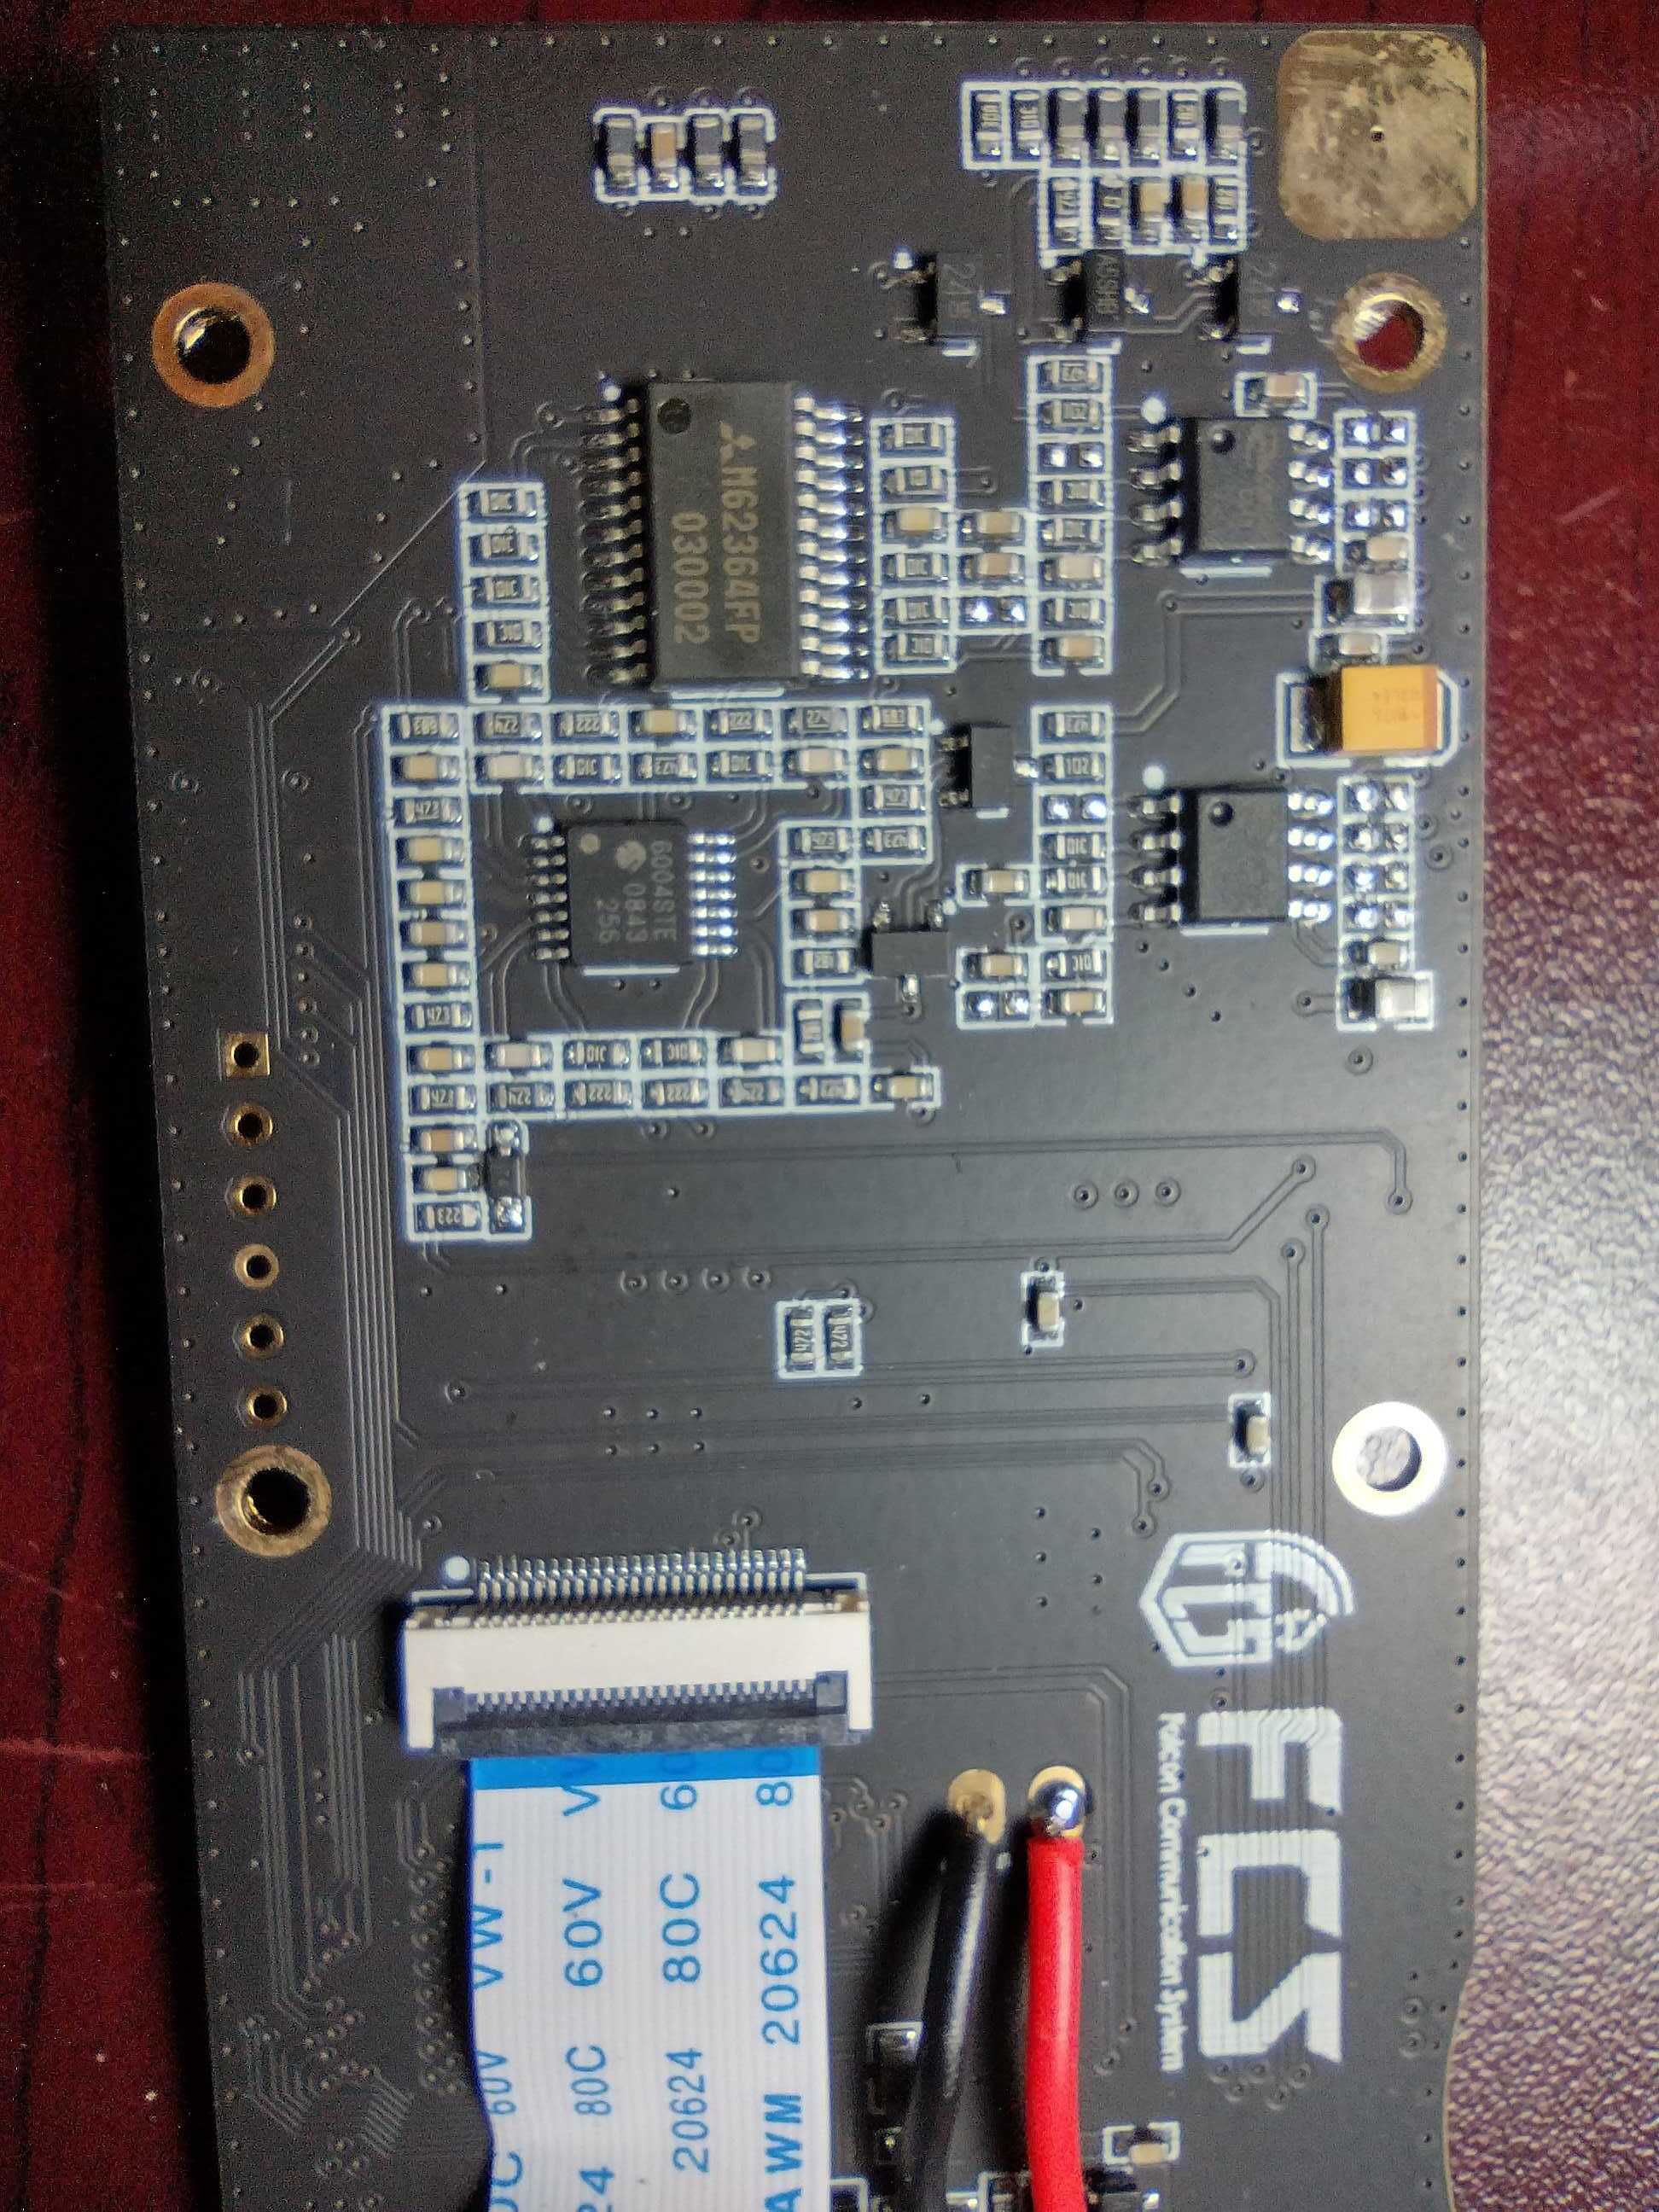 Back of the main board